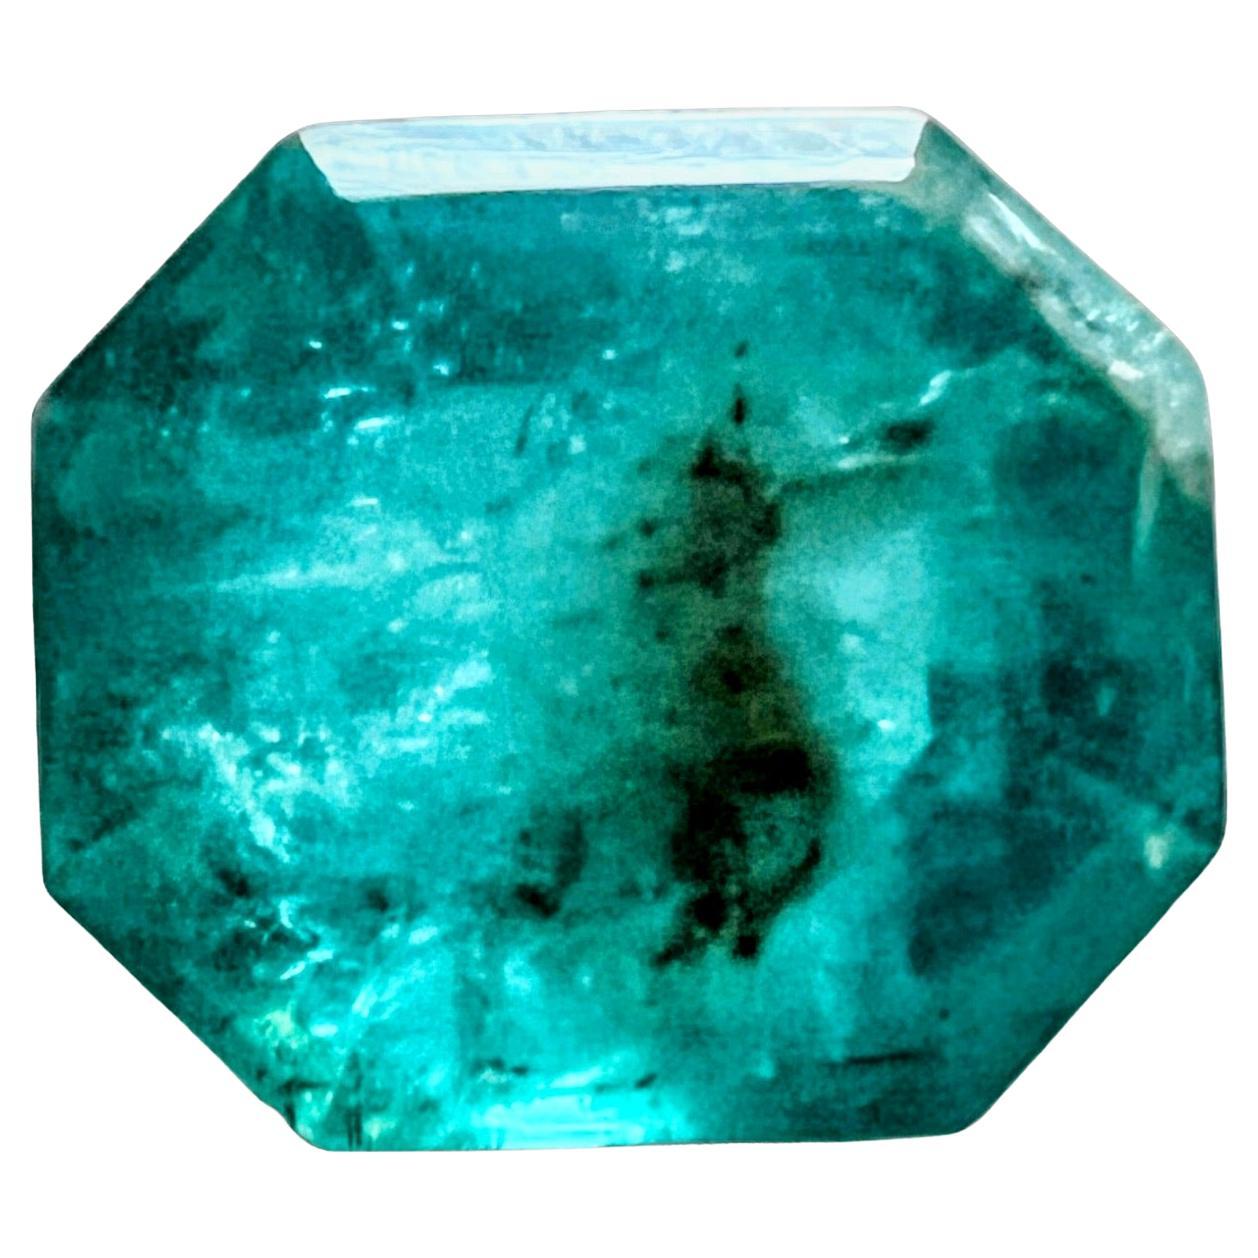 Women's or Men's 4.55ct Octagonal Cut No-Oil Untreated Emerald Gemstone For Sale